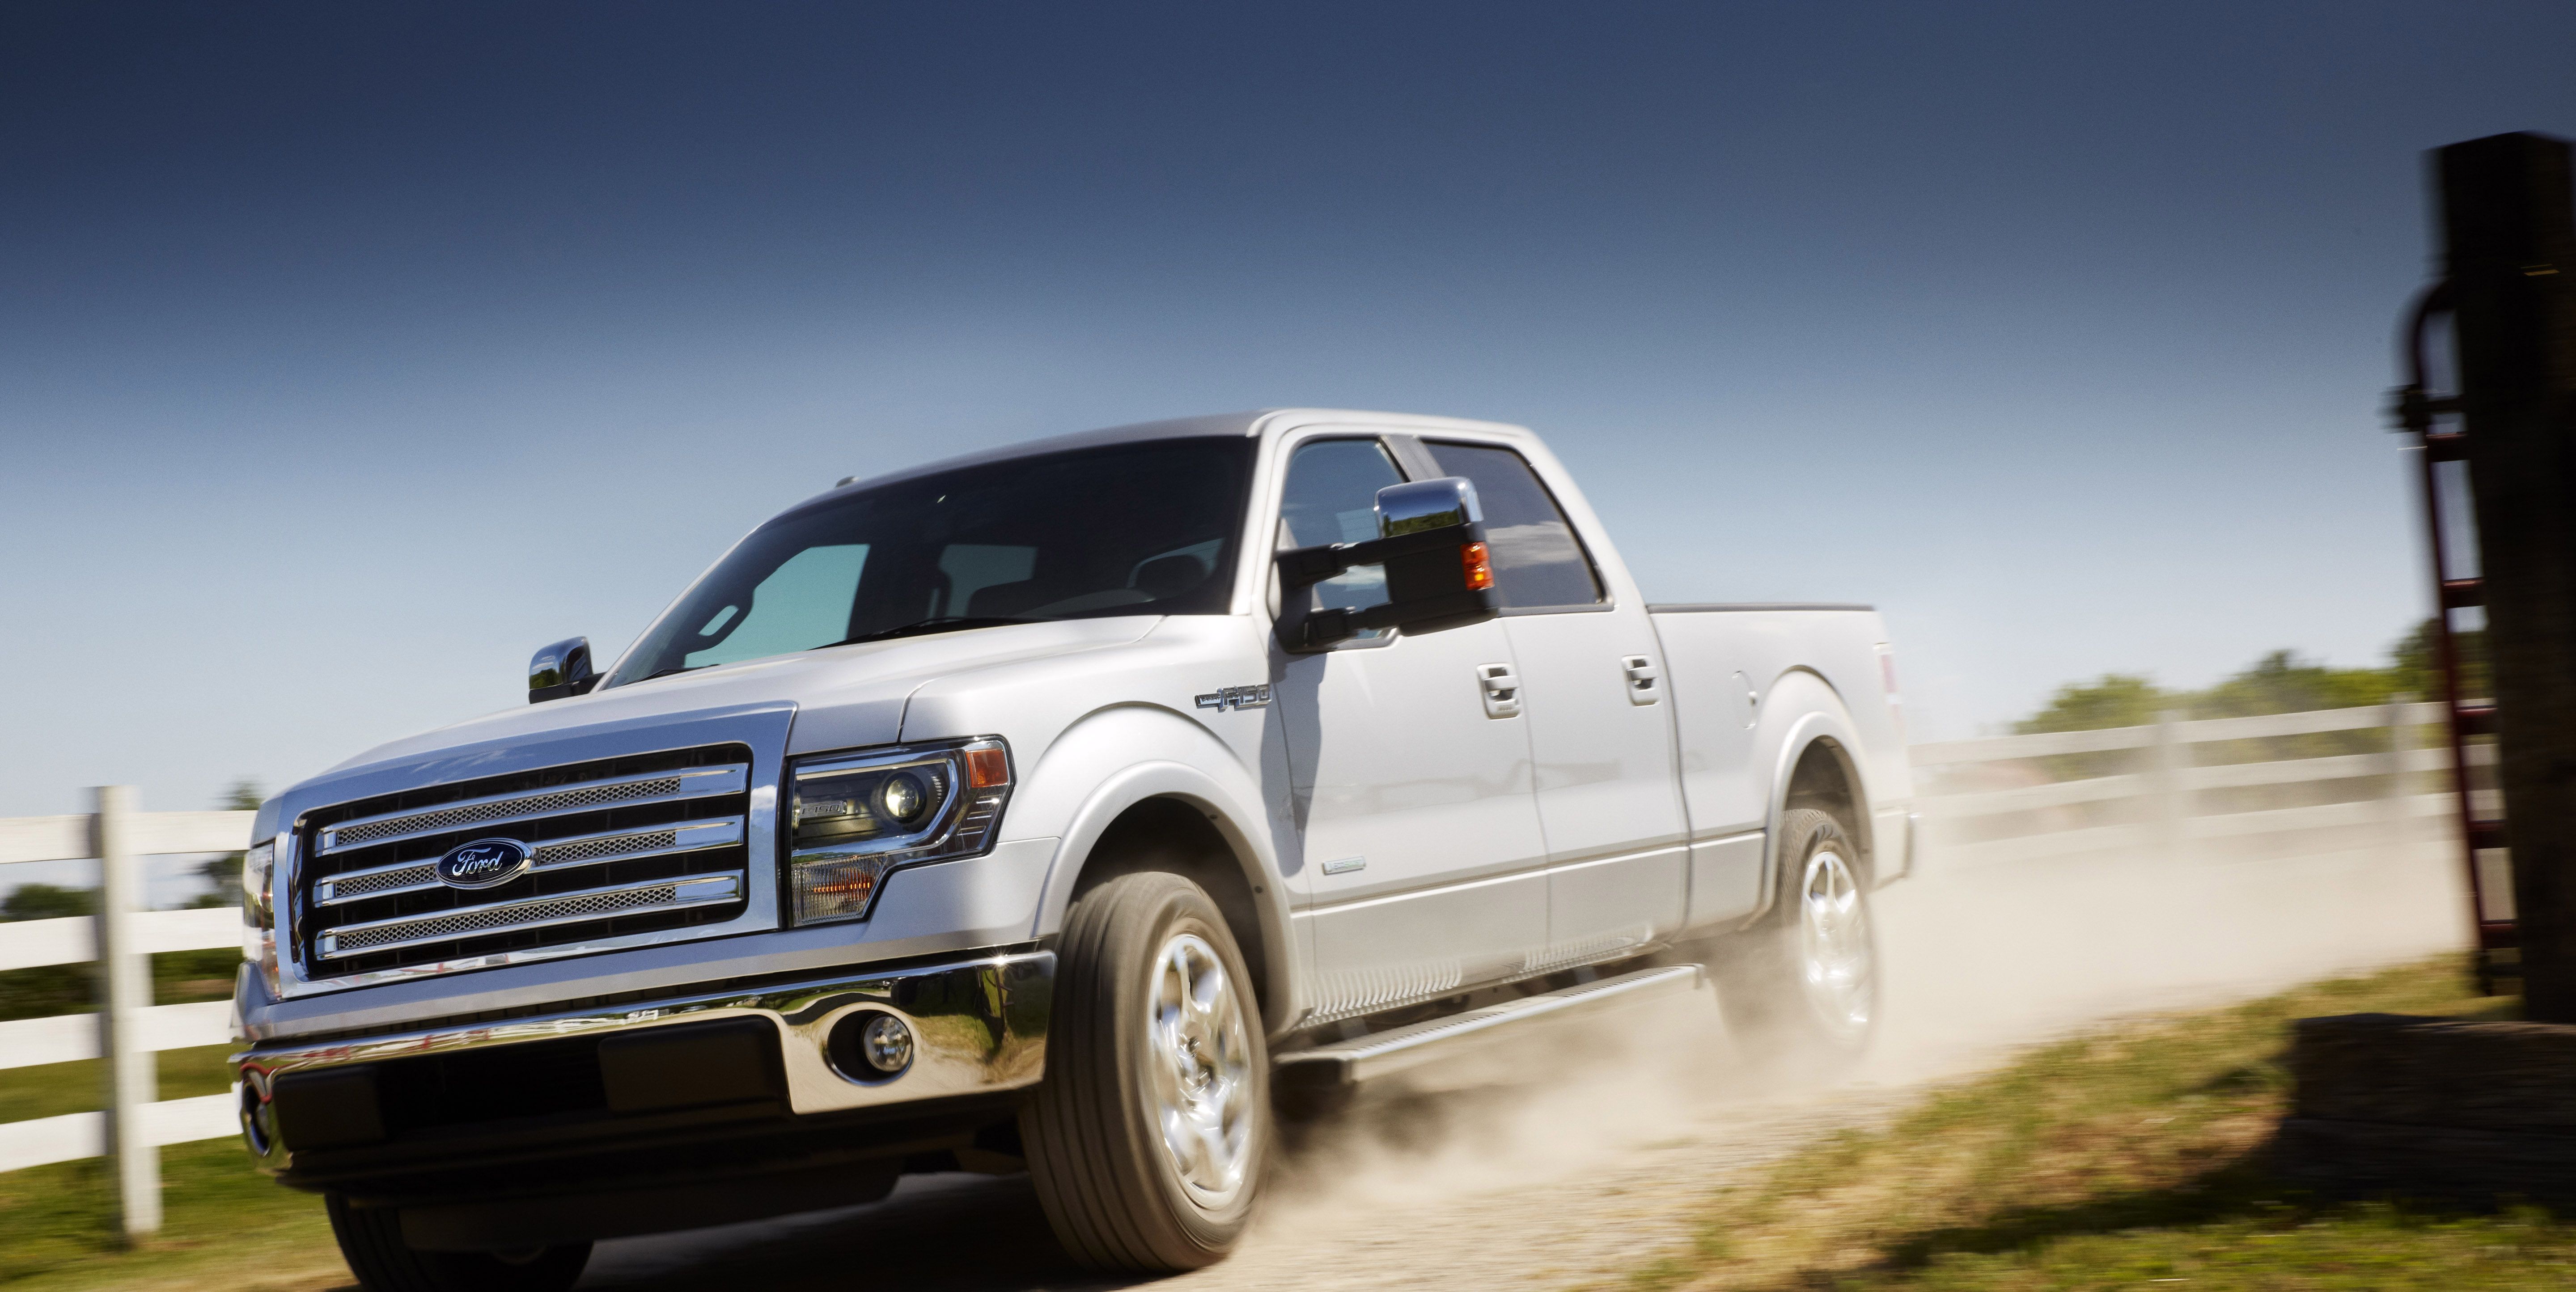 Ford Recalls More Than Half a Million F-150s Over Unexpected, Dramatic Downshifts